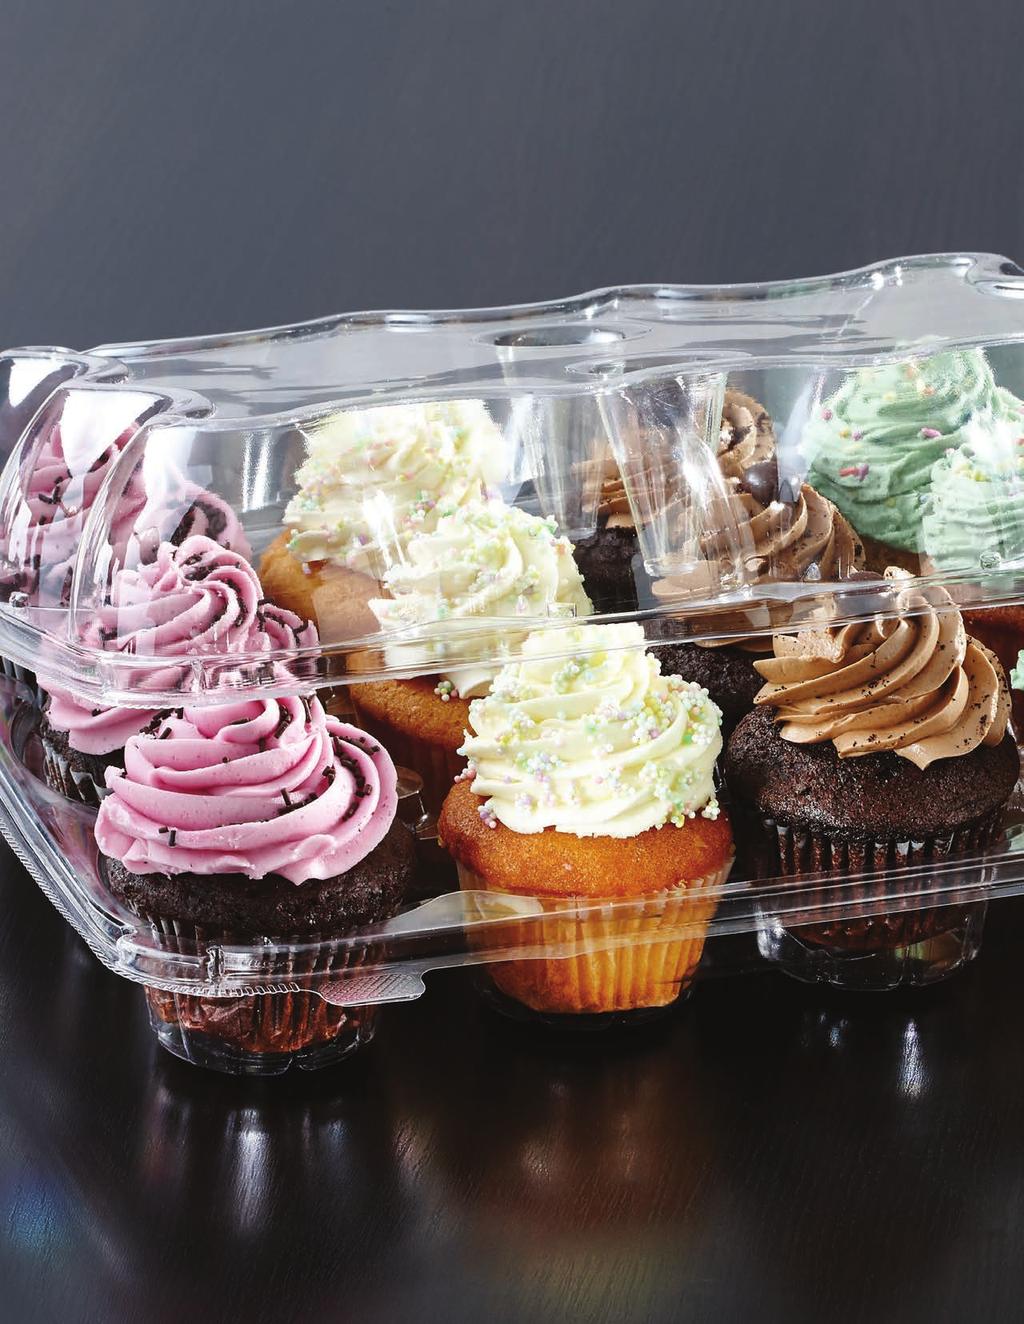 CUPCAKE, CAKE AND MUFFIN CONTAINERS SHOW OFF YOUR BAKED GOODS Sabert s high clarity bakery packaging drives impulse sales by making desserts look irresistible.